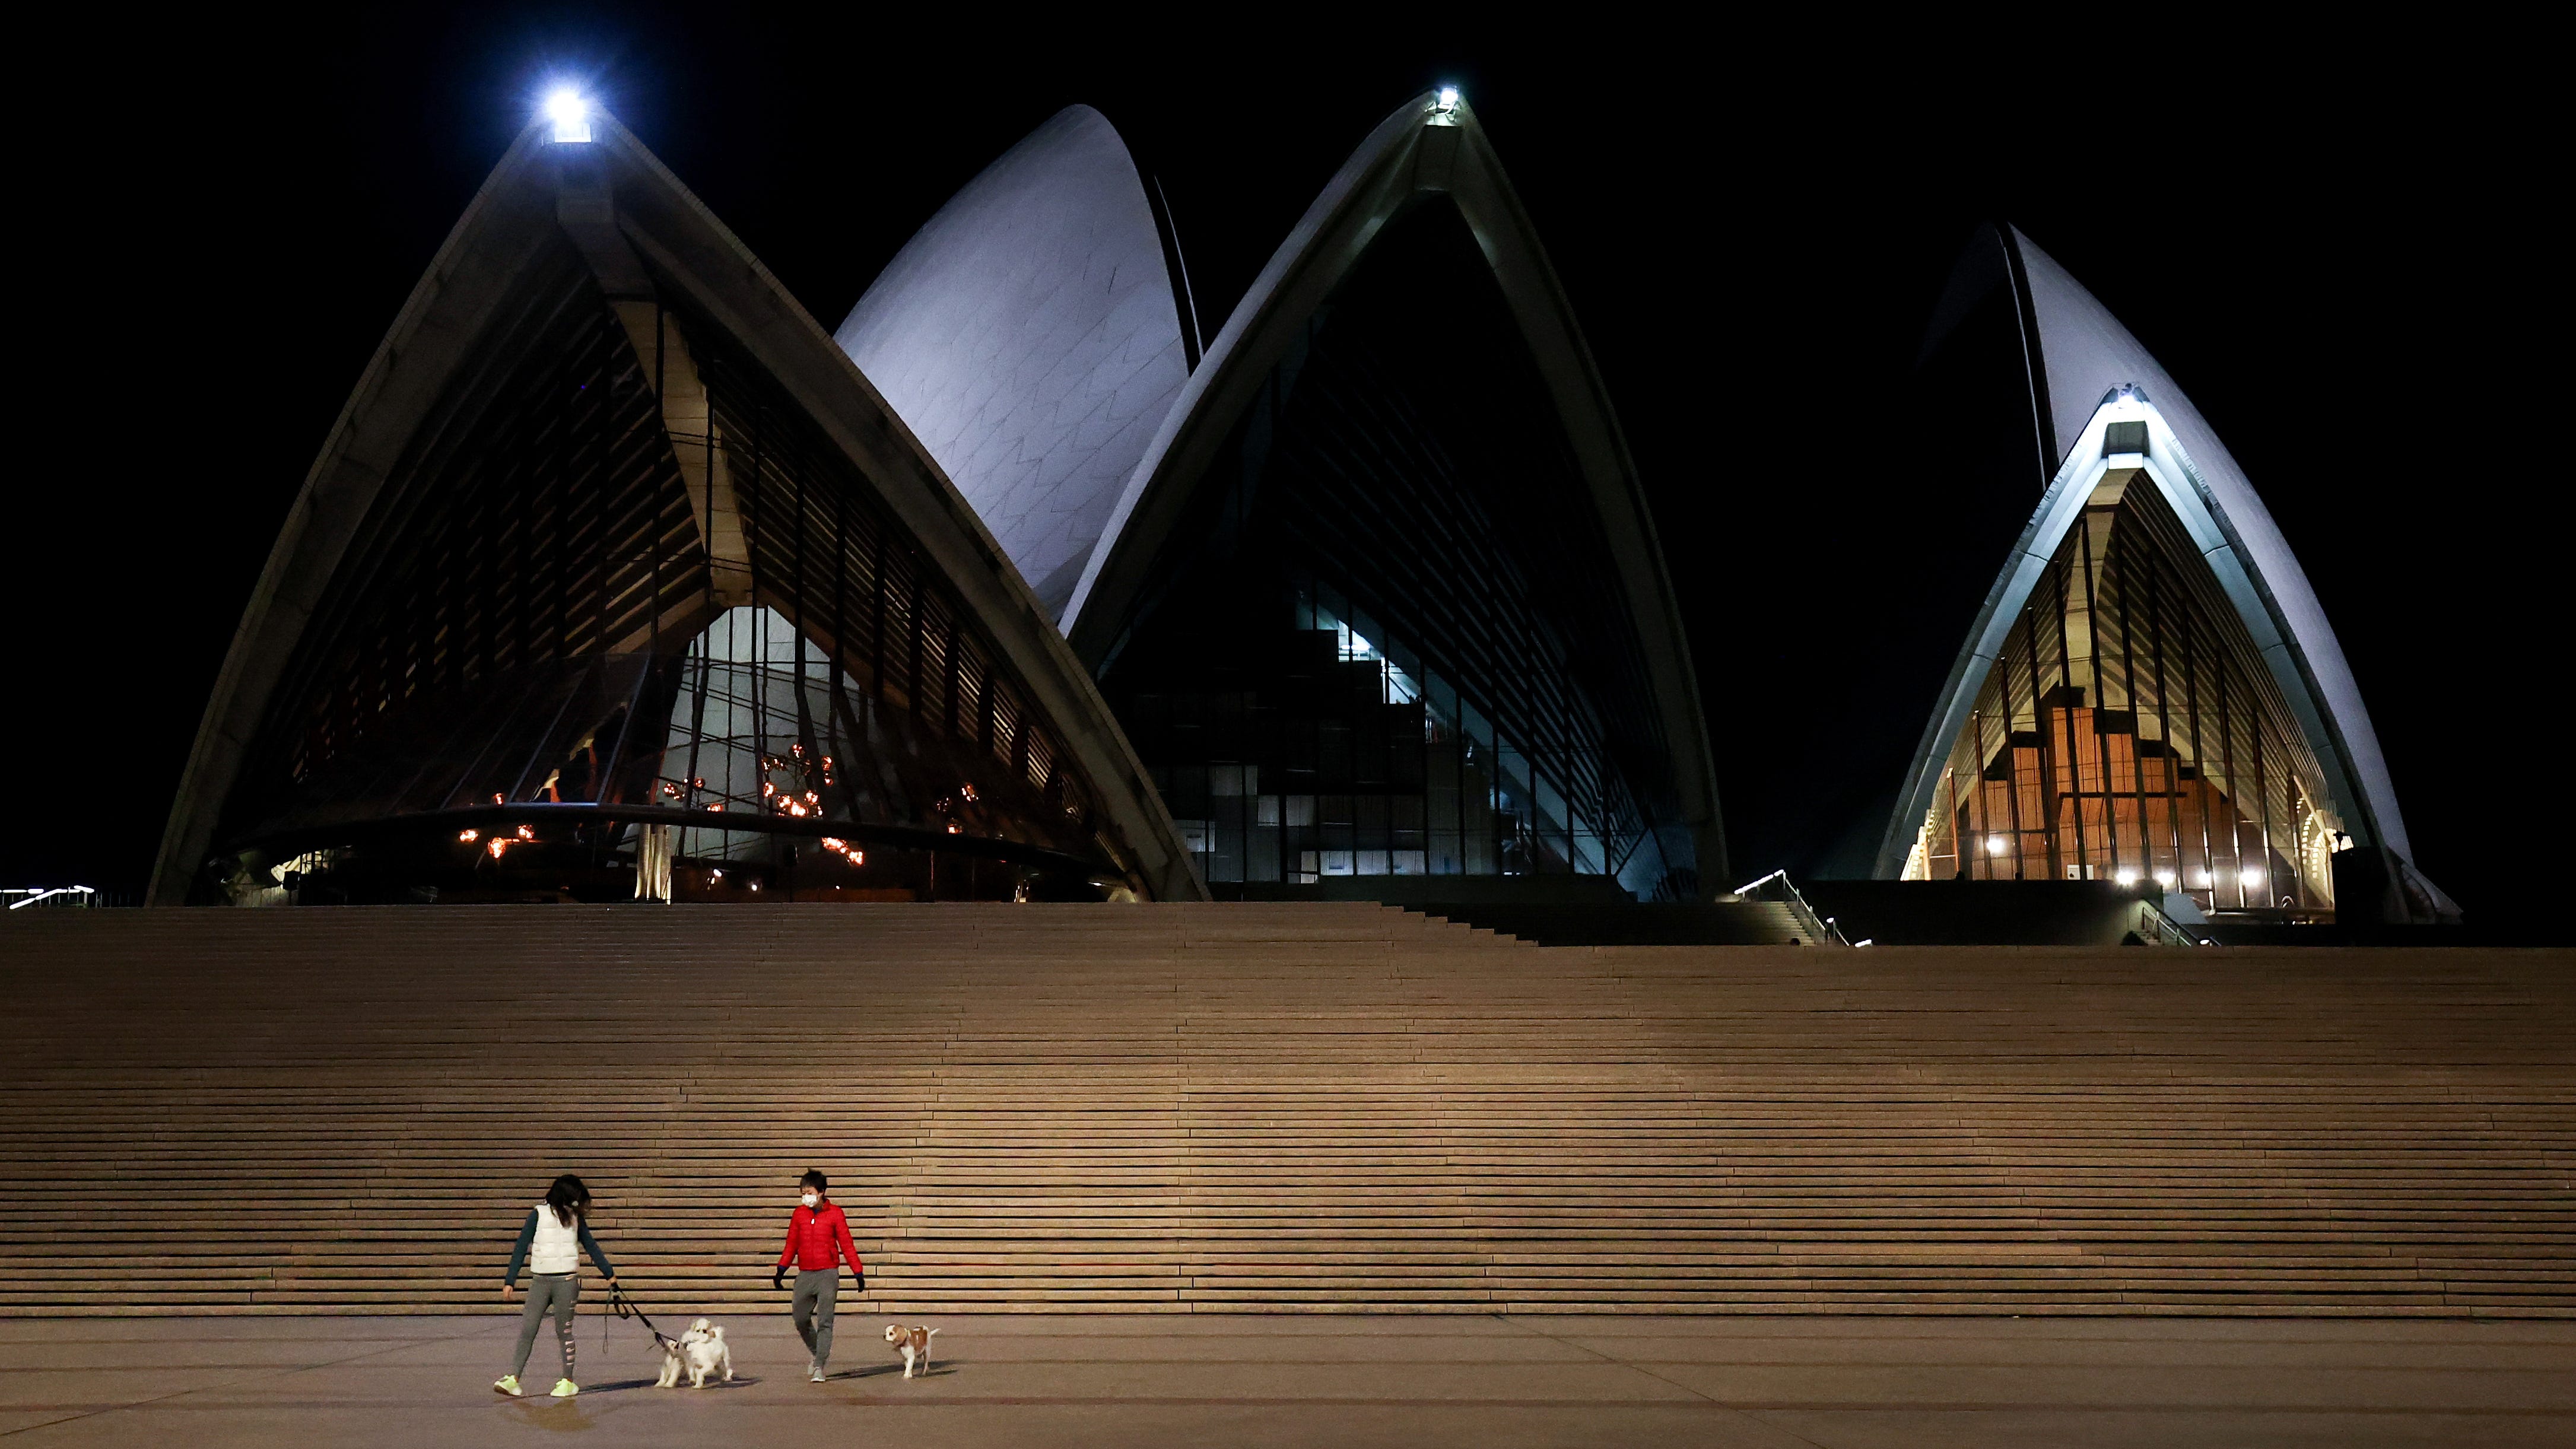 People walk dogs at an empty Sydney Opera House which is closed due to Covid-19 on June 26, 2021 in Sydney, Australia.